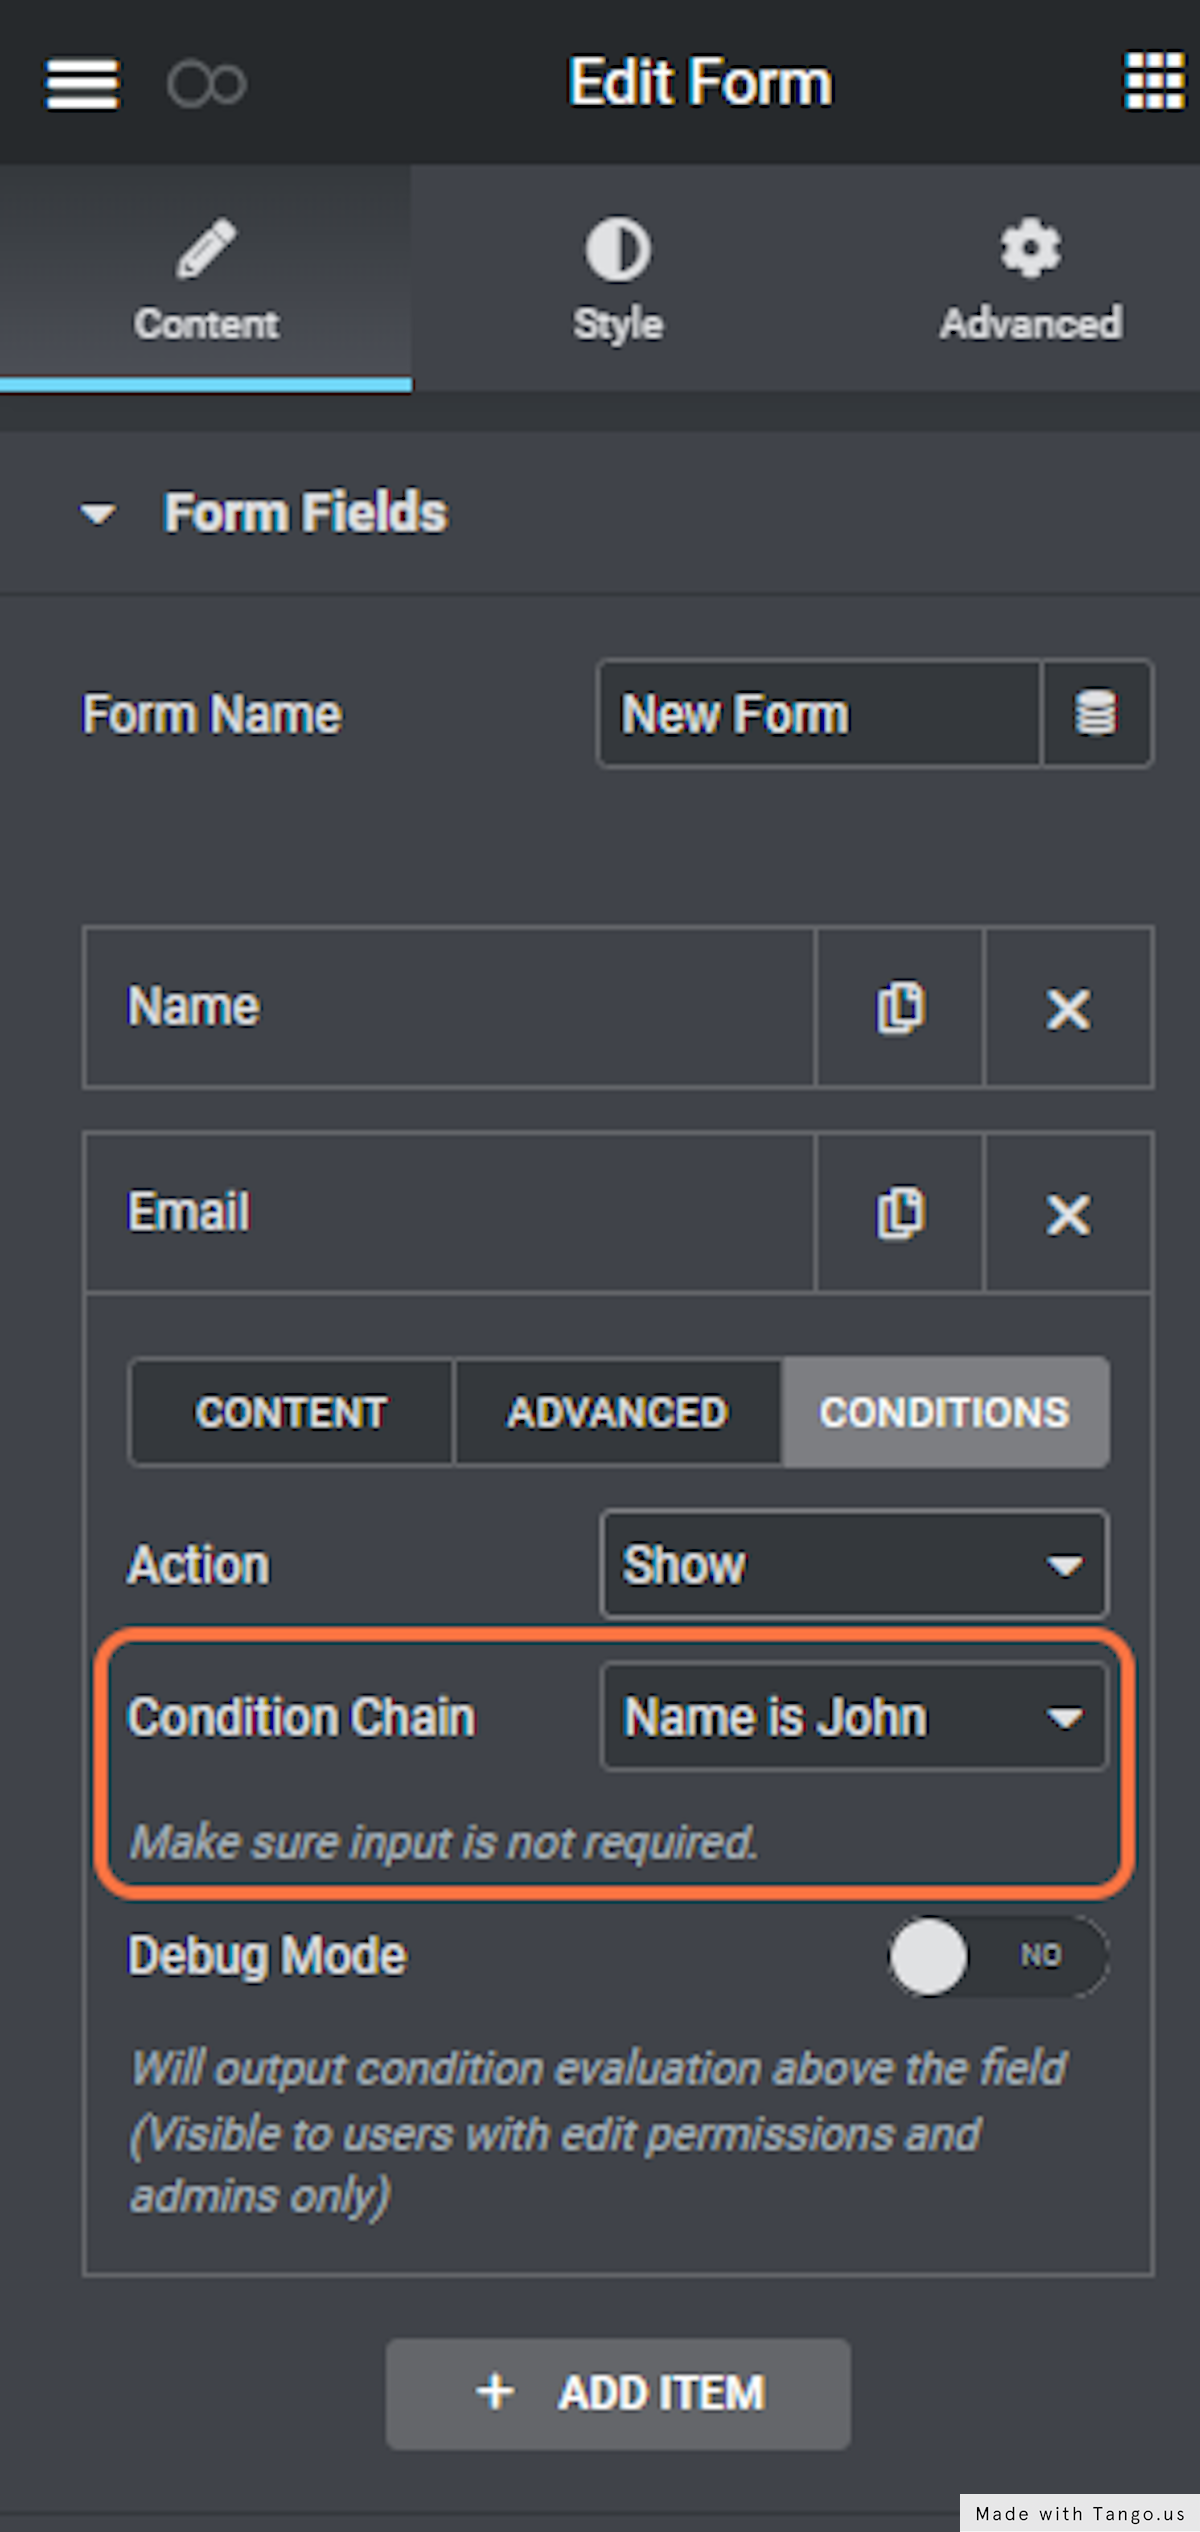 Select the Action "Show" and assign the condition